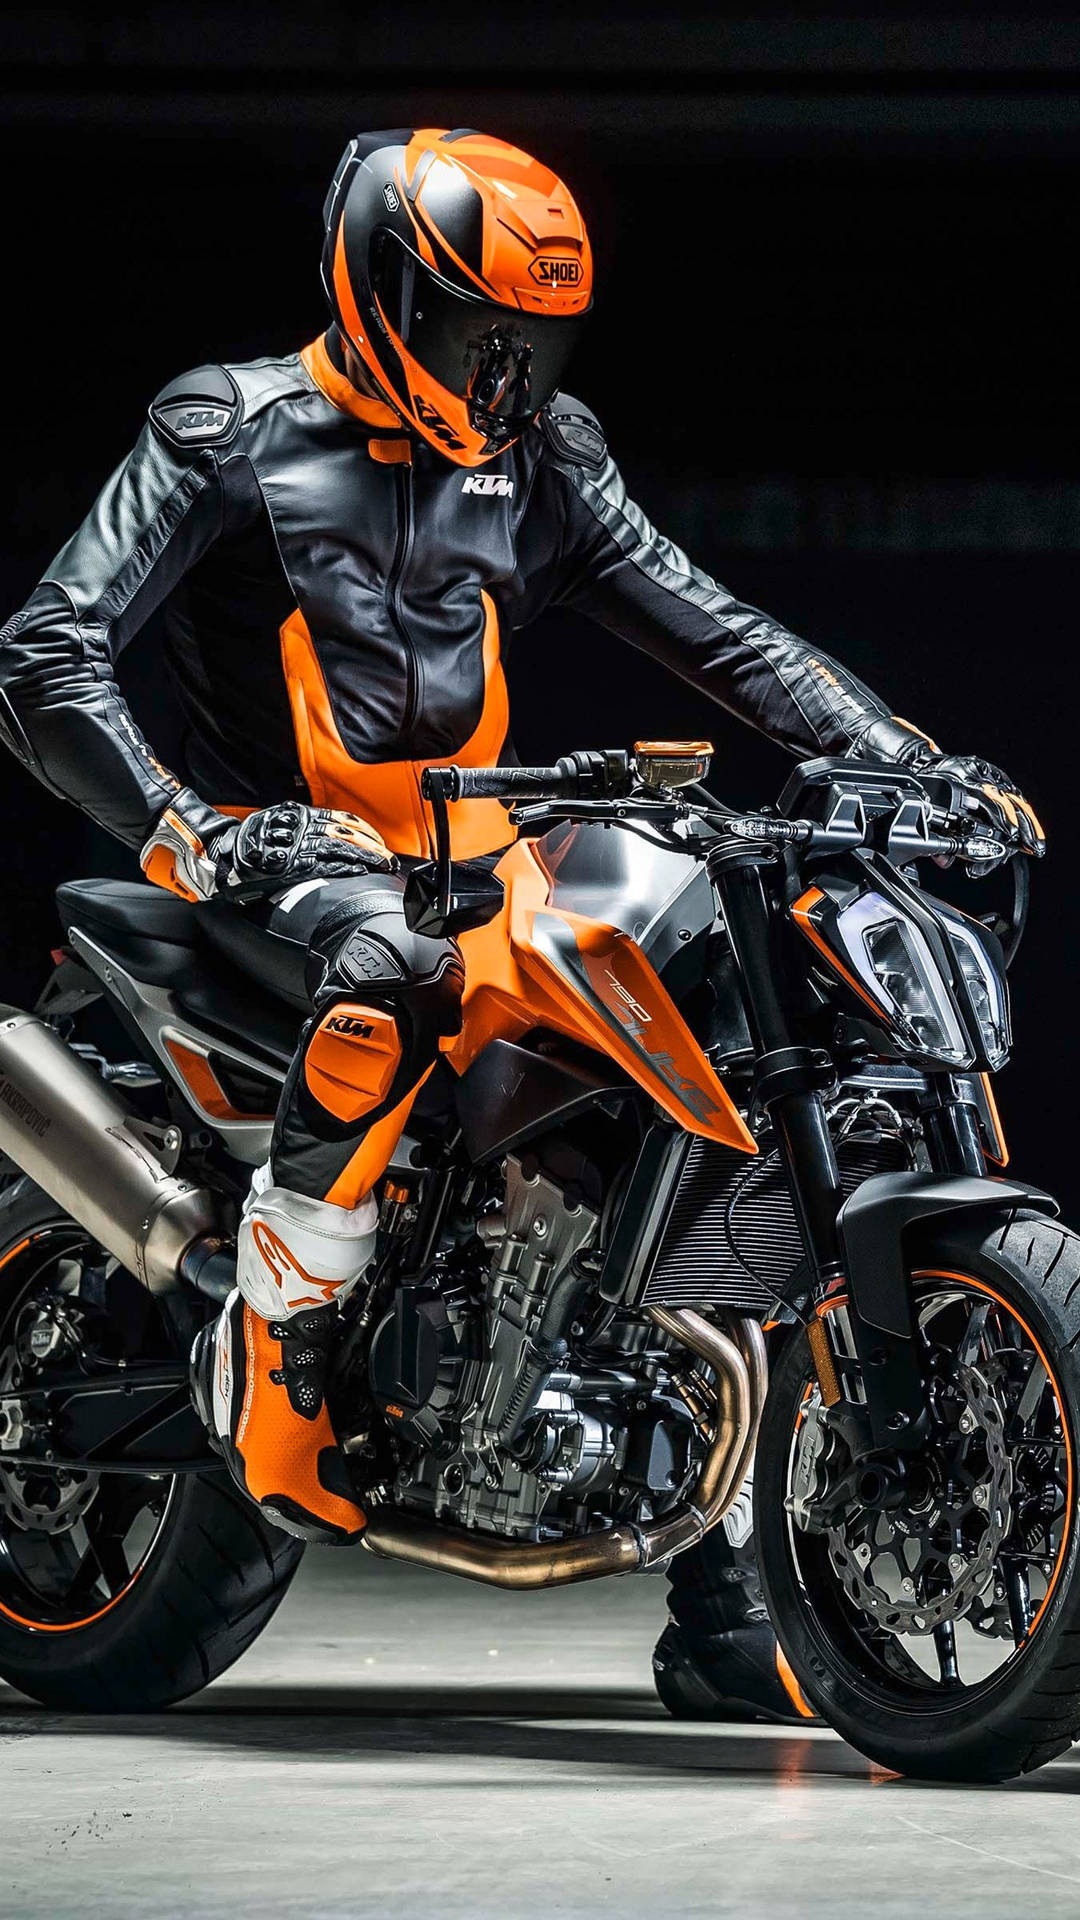 Free Ktm Iphone Wallpaper Downloads, [100+] Ktm Iphone Wallpapers for FREE  